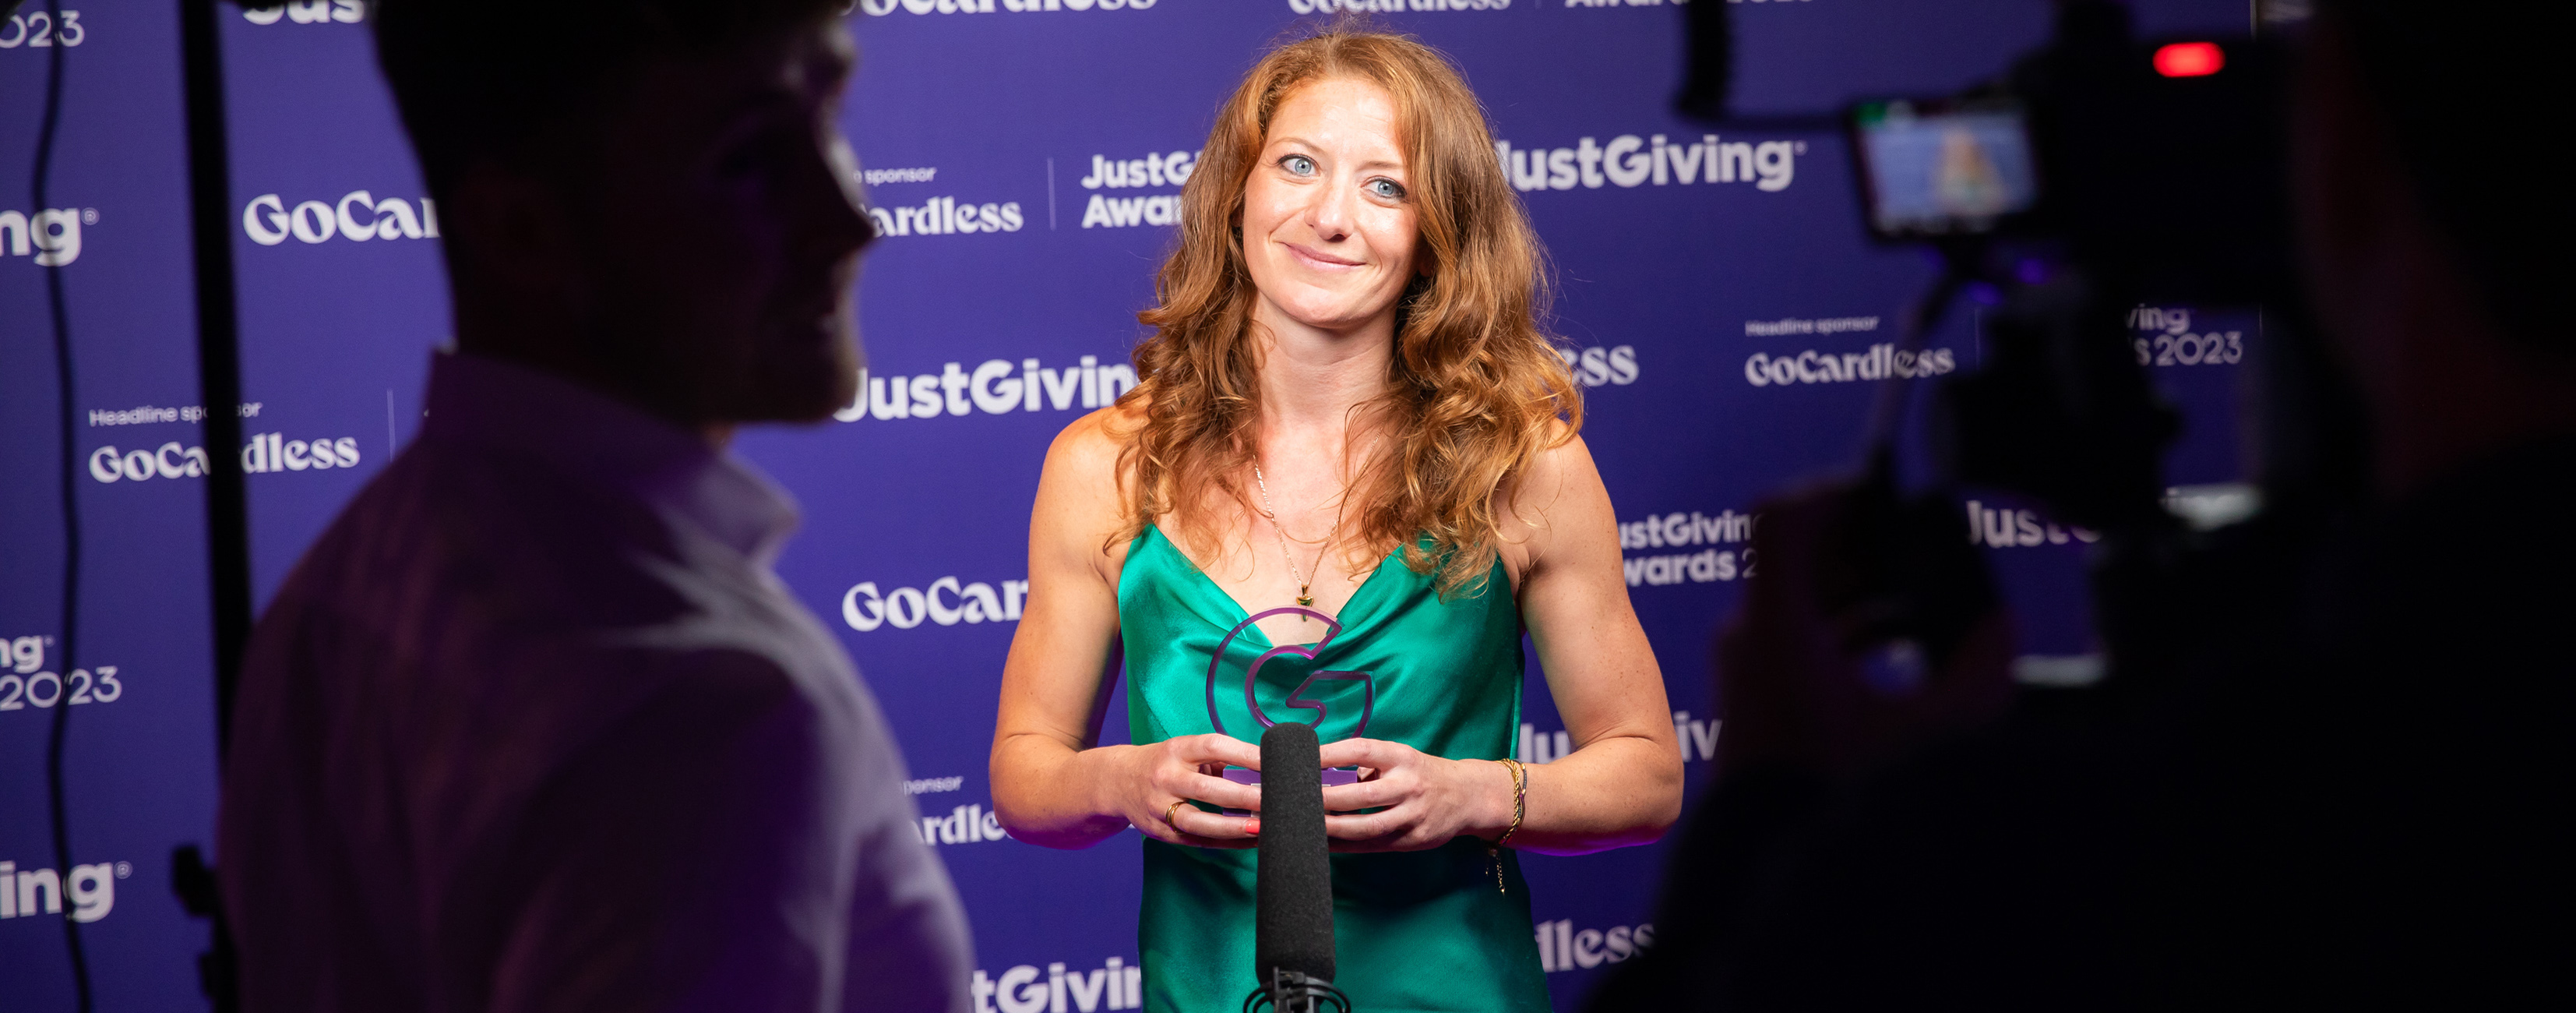 MYTIME CEO Krista Community Hero of the Year JustGiving